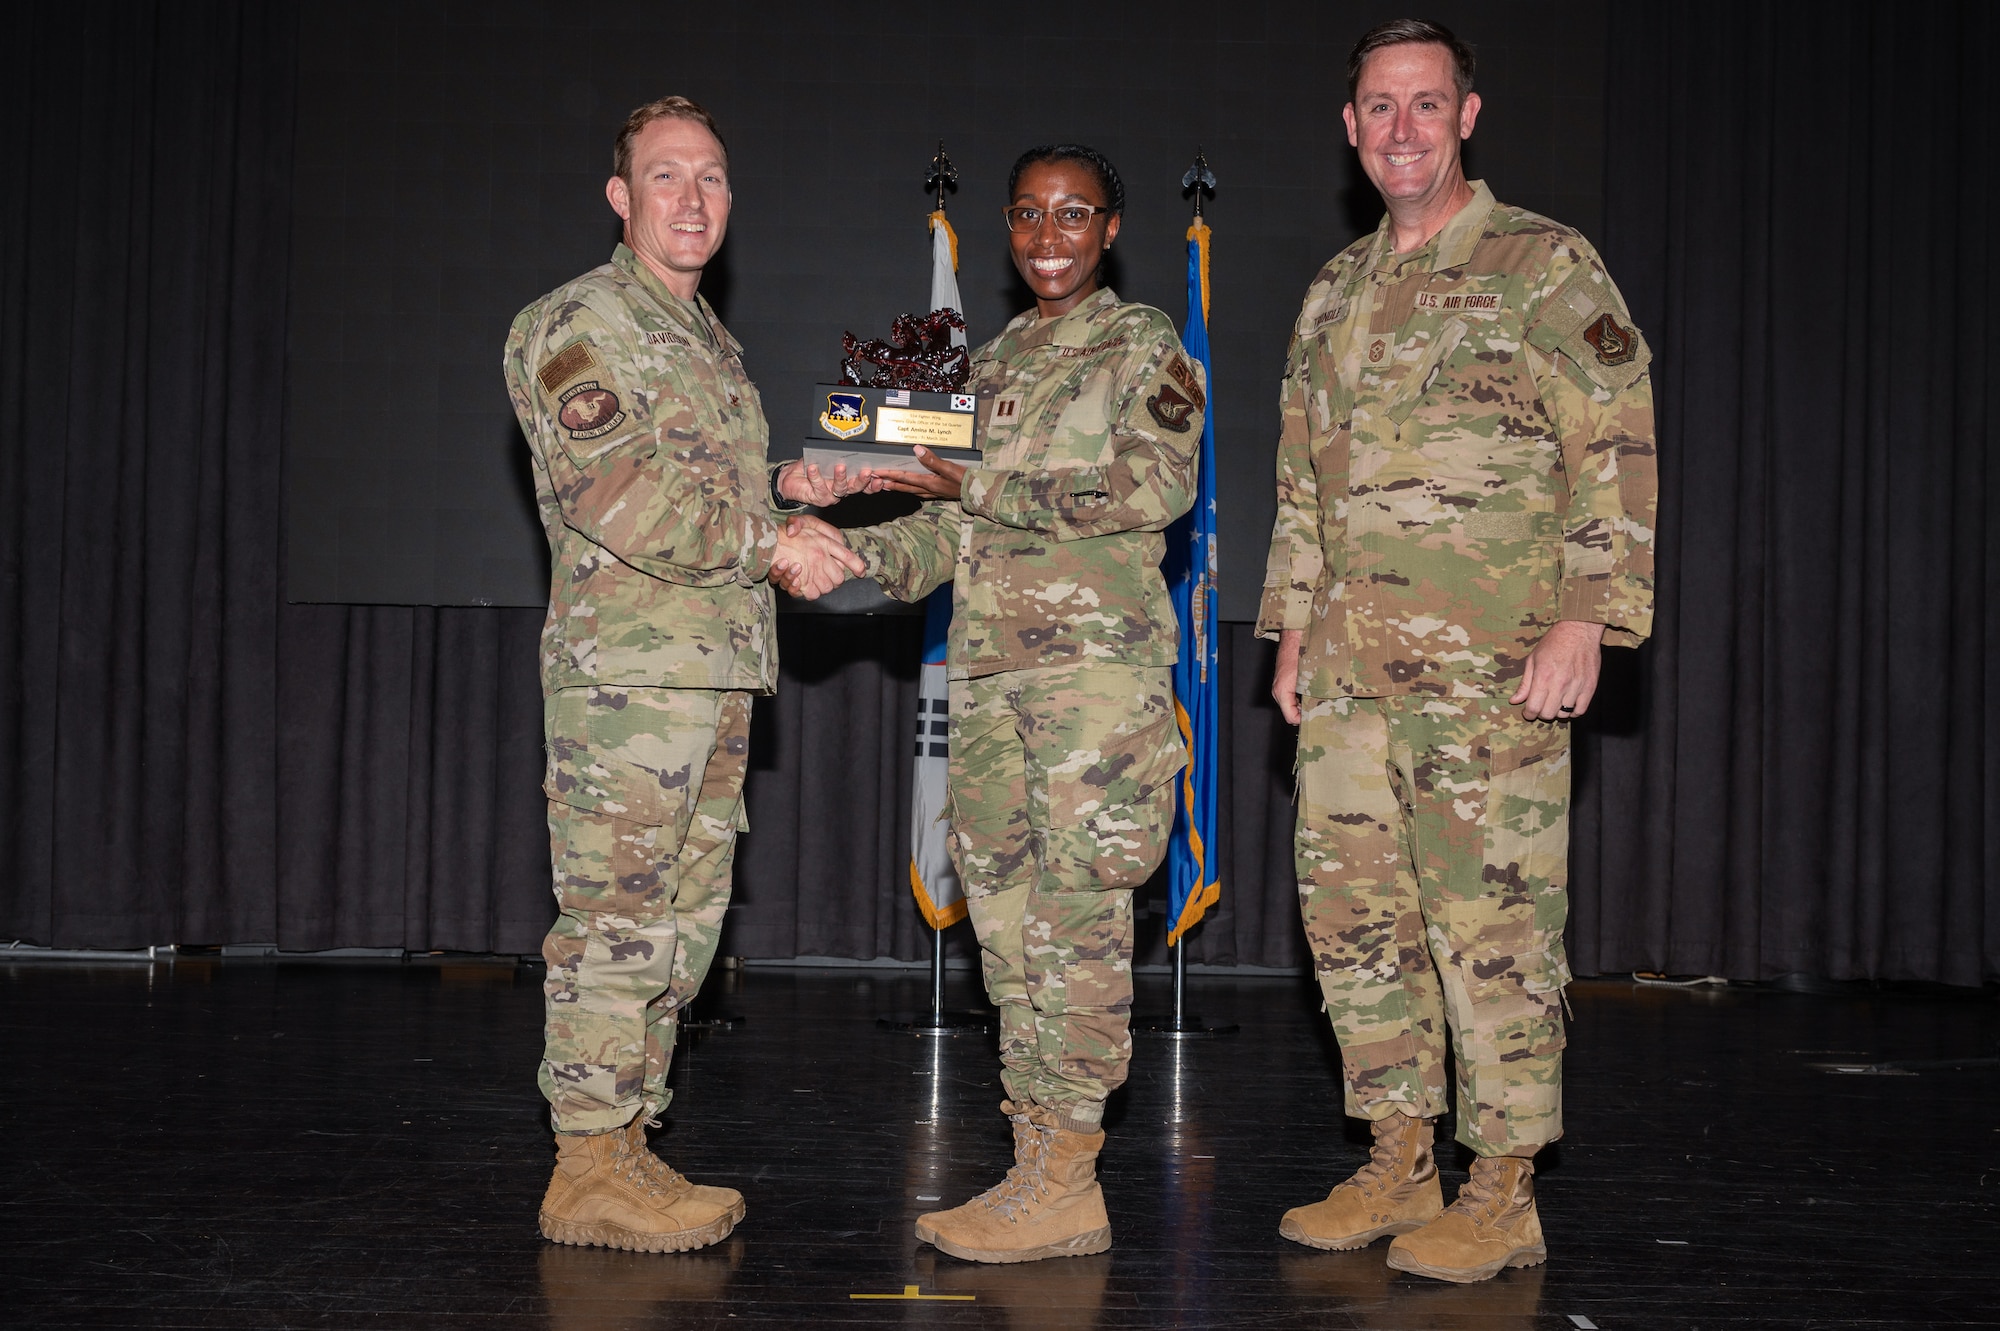 The 51st Fighter Wing command team presents the Company Grade Officer of the Quarter award to Capt. Amina Lynch, 51st Force Support Squadron sustainment services flight commander, during the 51st FW quarterly awards ceremony at Osan Air Base, Republic of Korea, April 19, 2024. 51st FW leadership regularly acknowledges outstanding performers, expressing appreciation for their contributions to the "Fight Tonight" mission. (U.S. Air Force photo by Airman 1st Class Chase Verzaal)